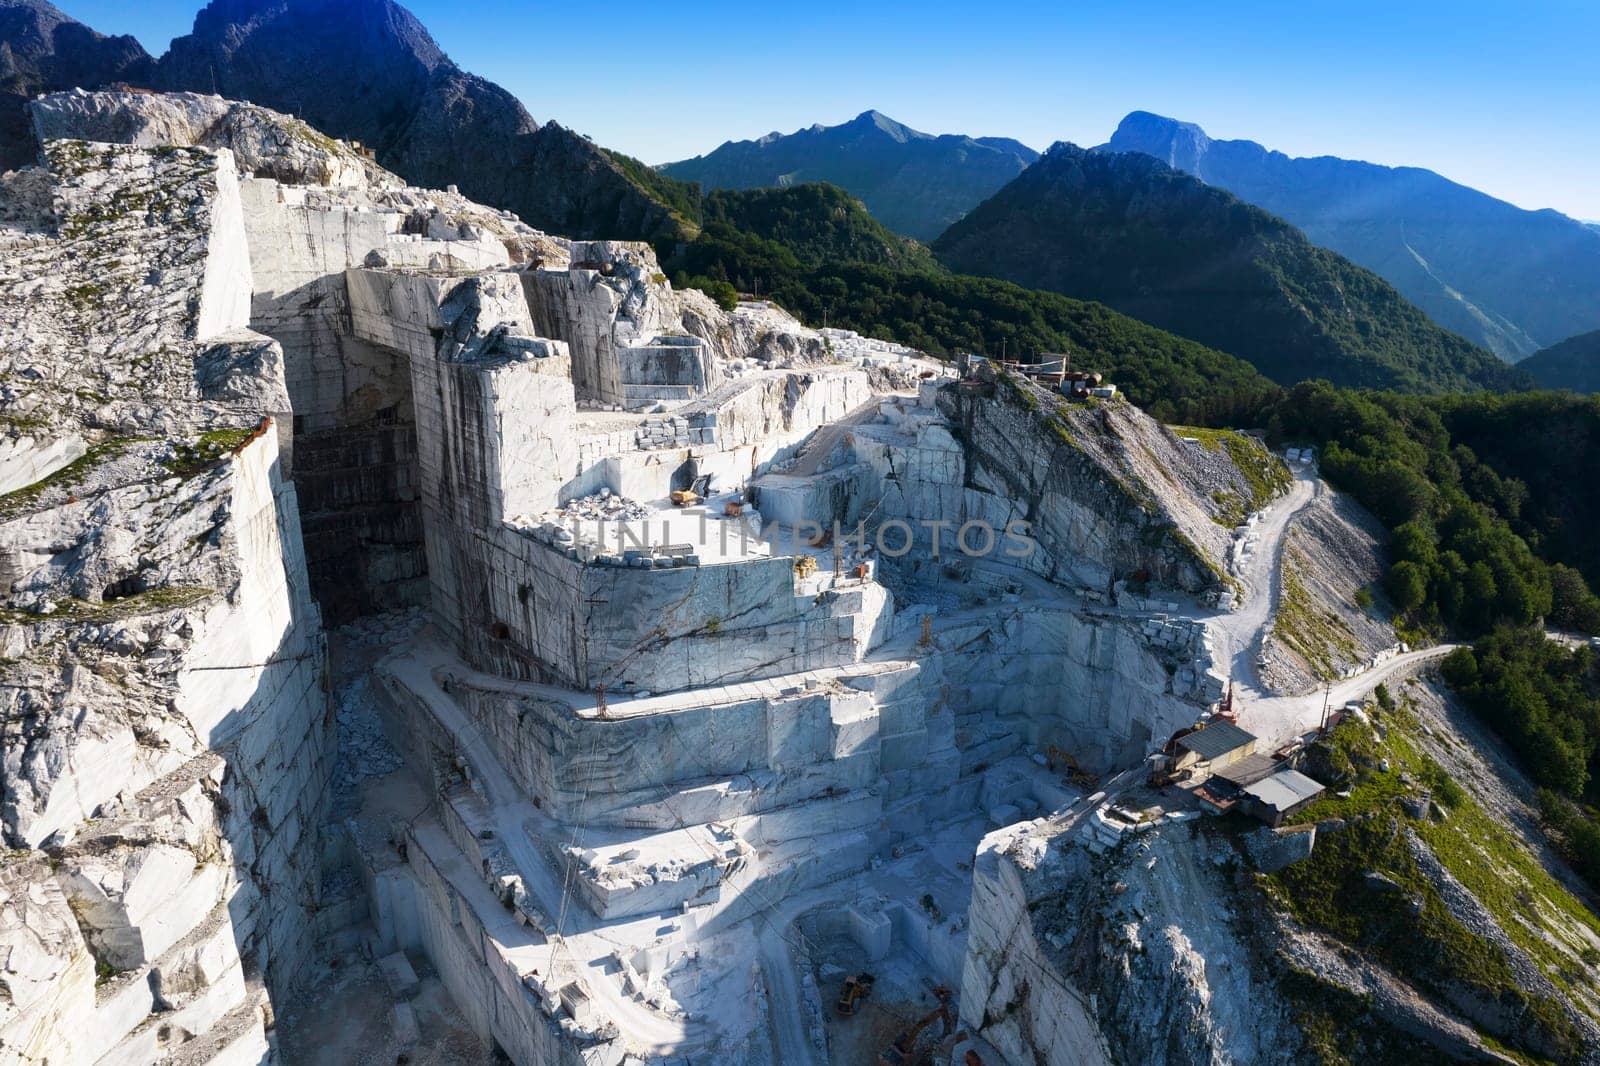 Aerial photographic documentation of a quarry for the extraction of white marble in Carrara Italy 
